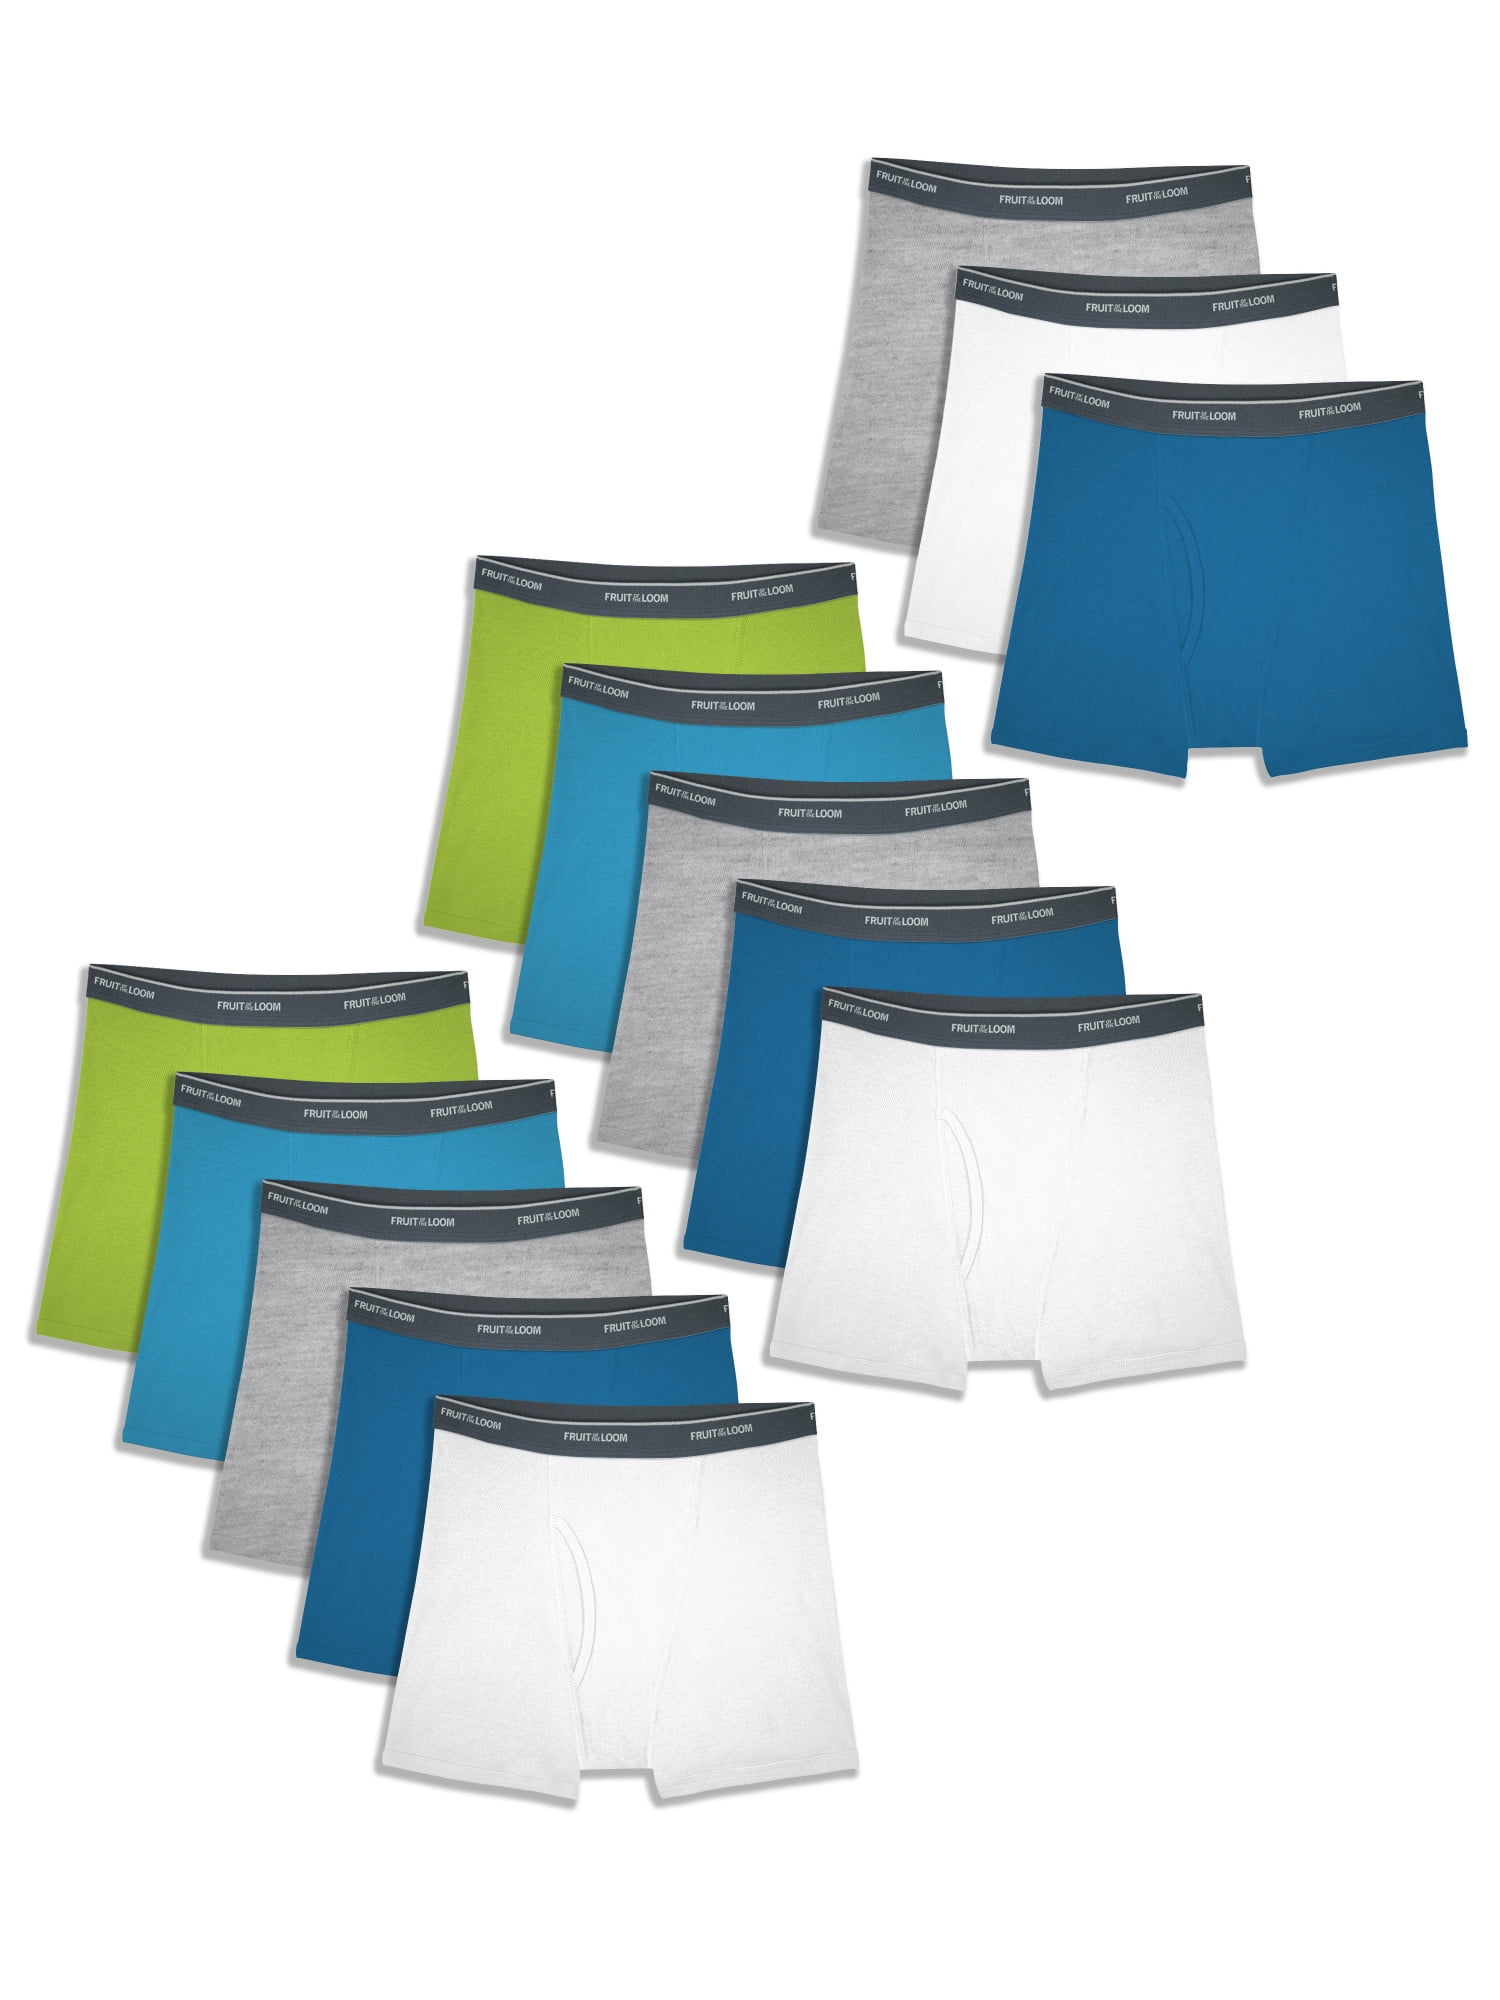 Boxer Briefs Size Medium 10-12 Details about   New Fruit Of The Loom Bonus Pack 10 Total 